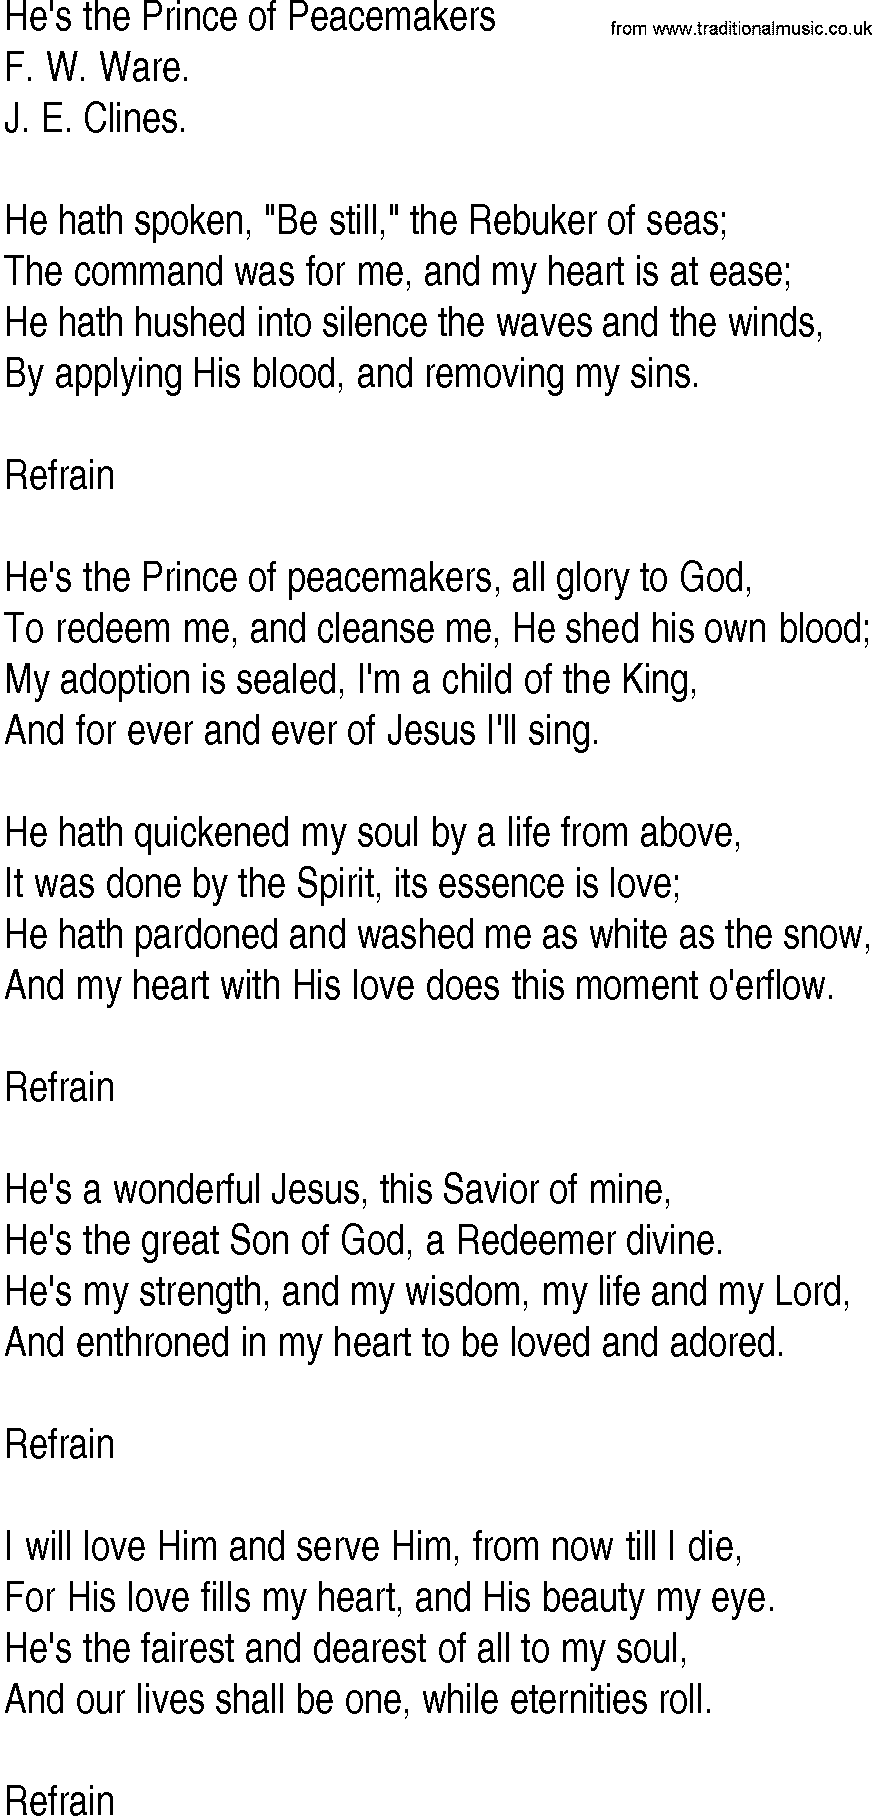 Hymn and Gospel Song: He's the Prince of Peacemakers by F W Ware lyrics